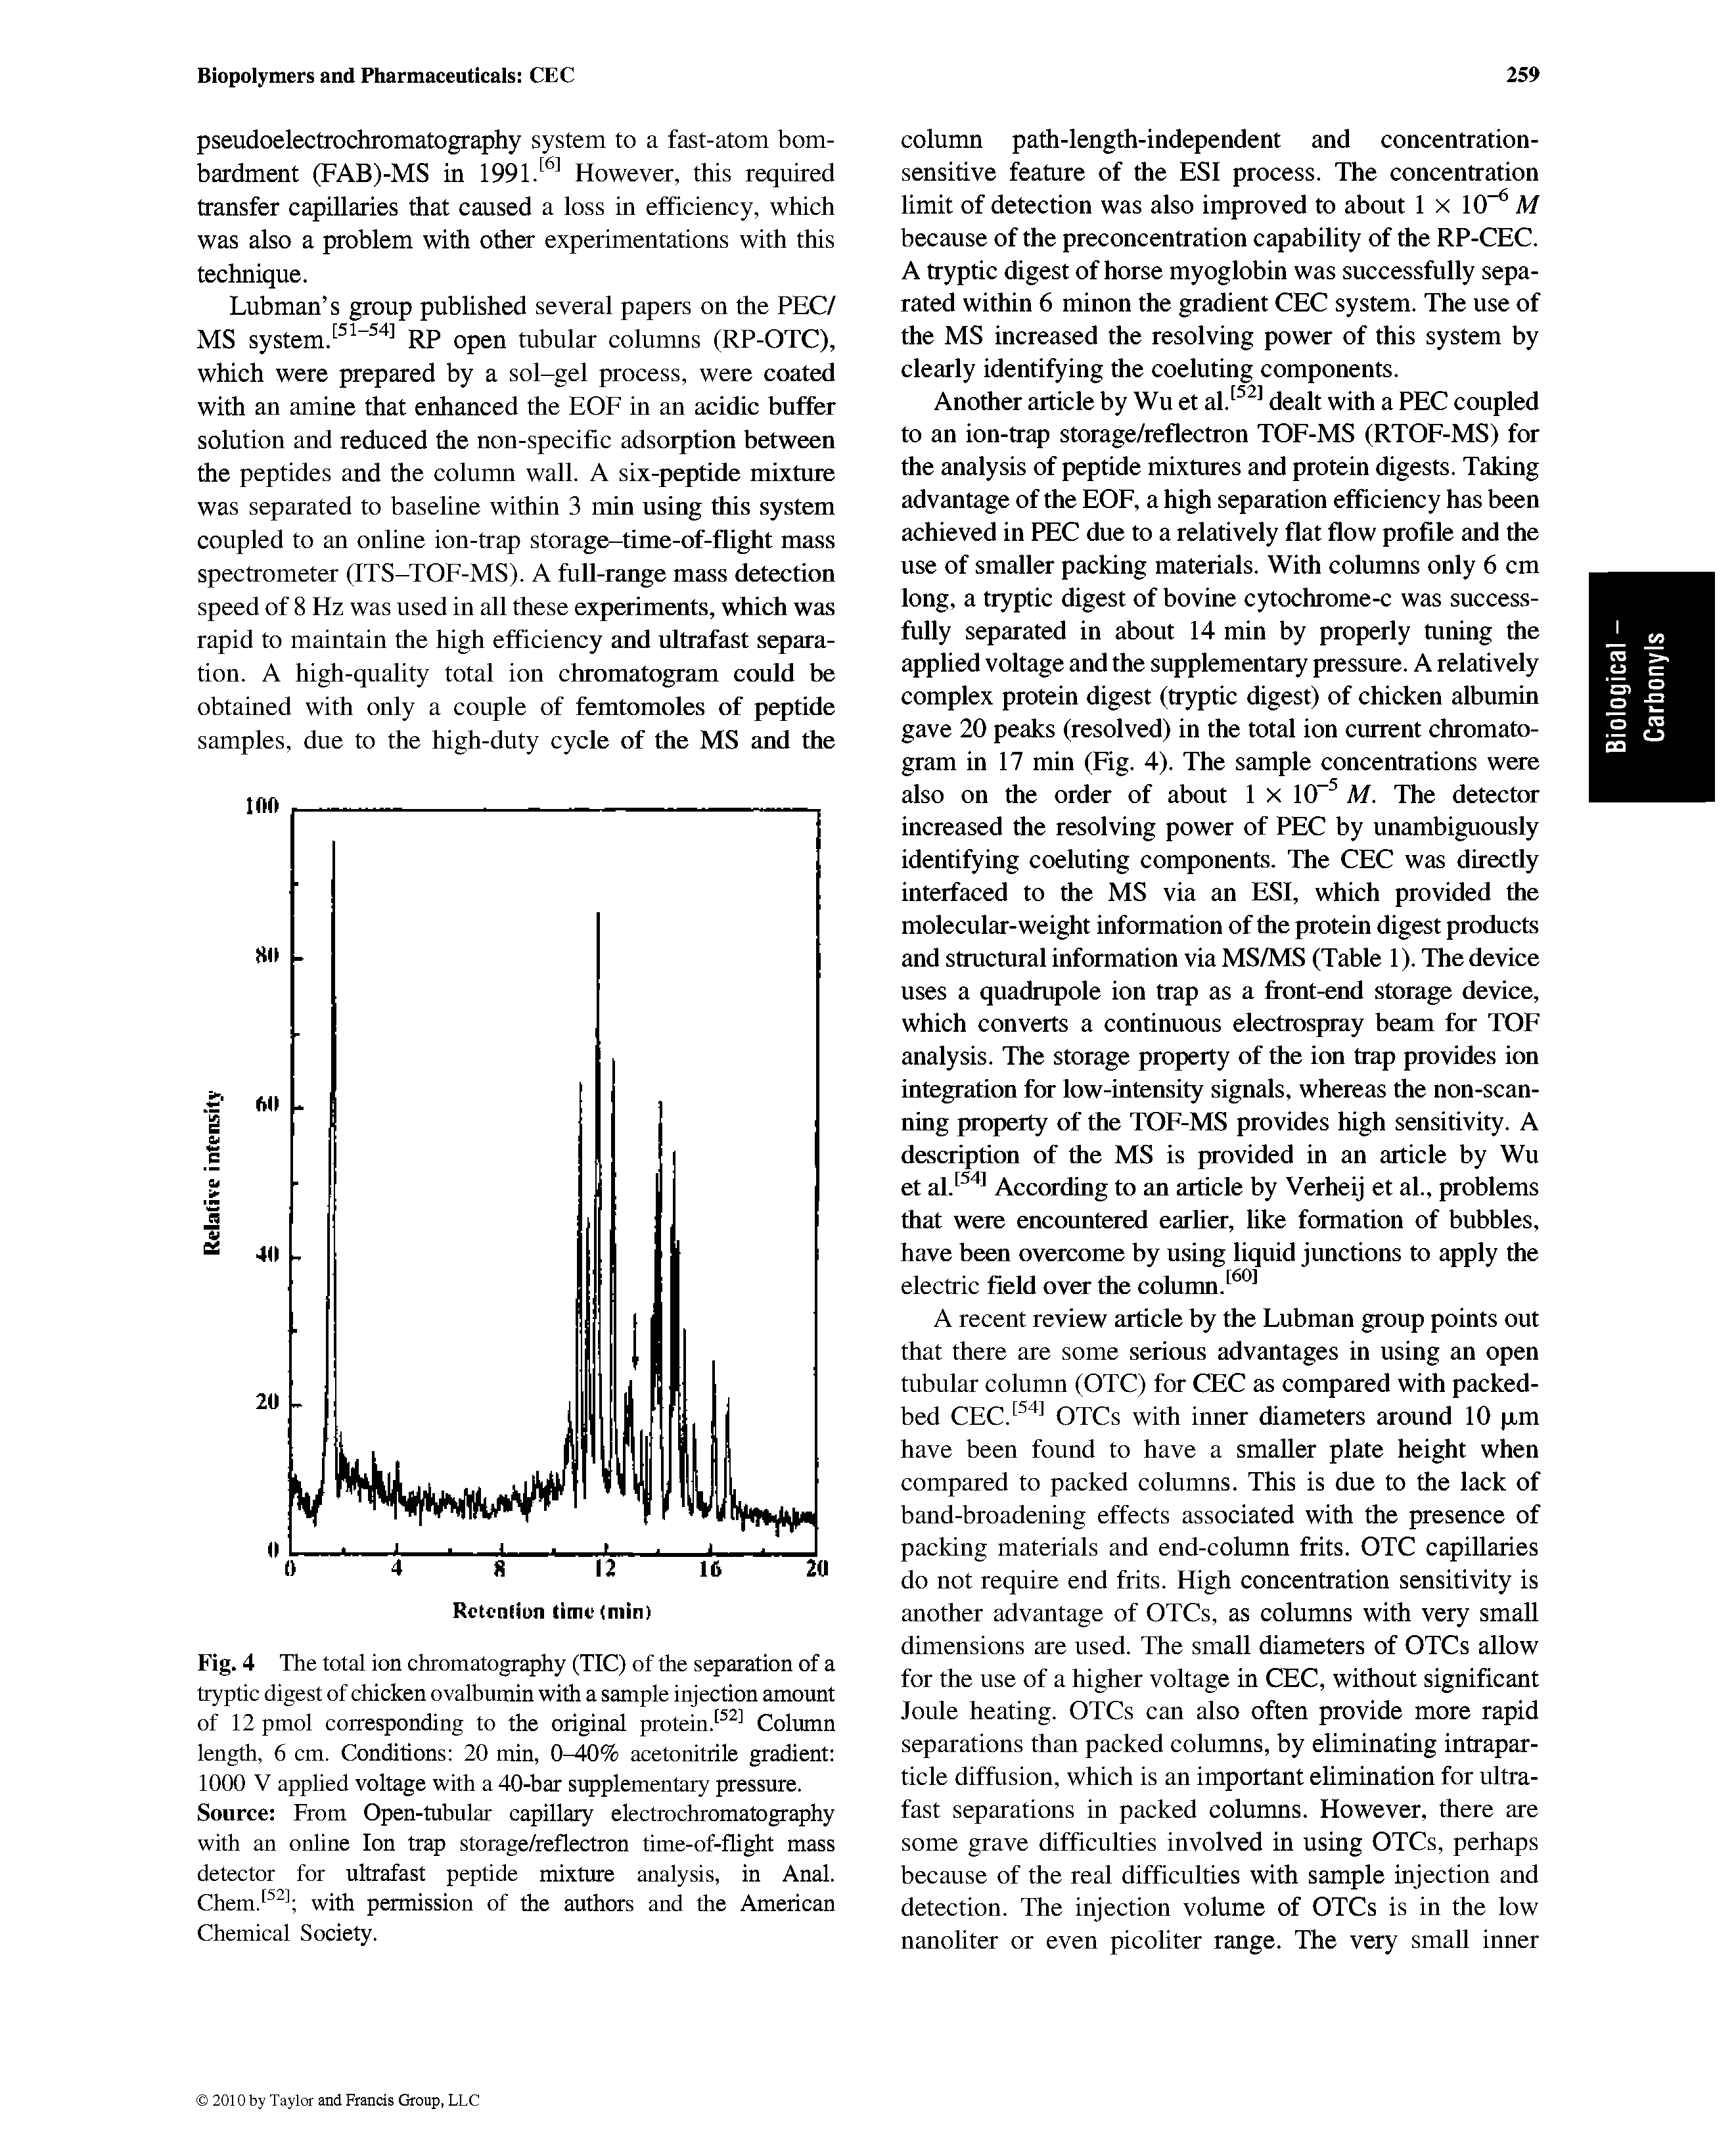 Fig. 4 The total ion chromatography (TIC) of the separation of a hyptic digest of chicken ovalhumin with a sample injection amount of 12 pmol corresponding to the original protein. Column length, 6 cm. Conditions 20 min, 0-40% acetonitrile gradient 1000 V apphed voltage with a 40-har supplementary pressure. Source From Open-tuhular capillary electrochromatography with an onhne Ion trap storage/reflectron time-of-flight mass detector for ultrafast peptide mixture analysis, in Anal. Chem.f with permission of the authors and the American Chemical Society.